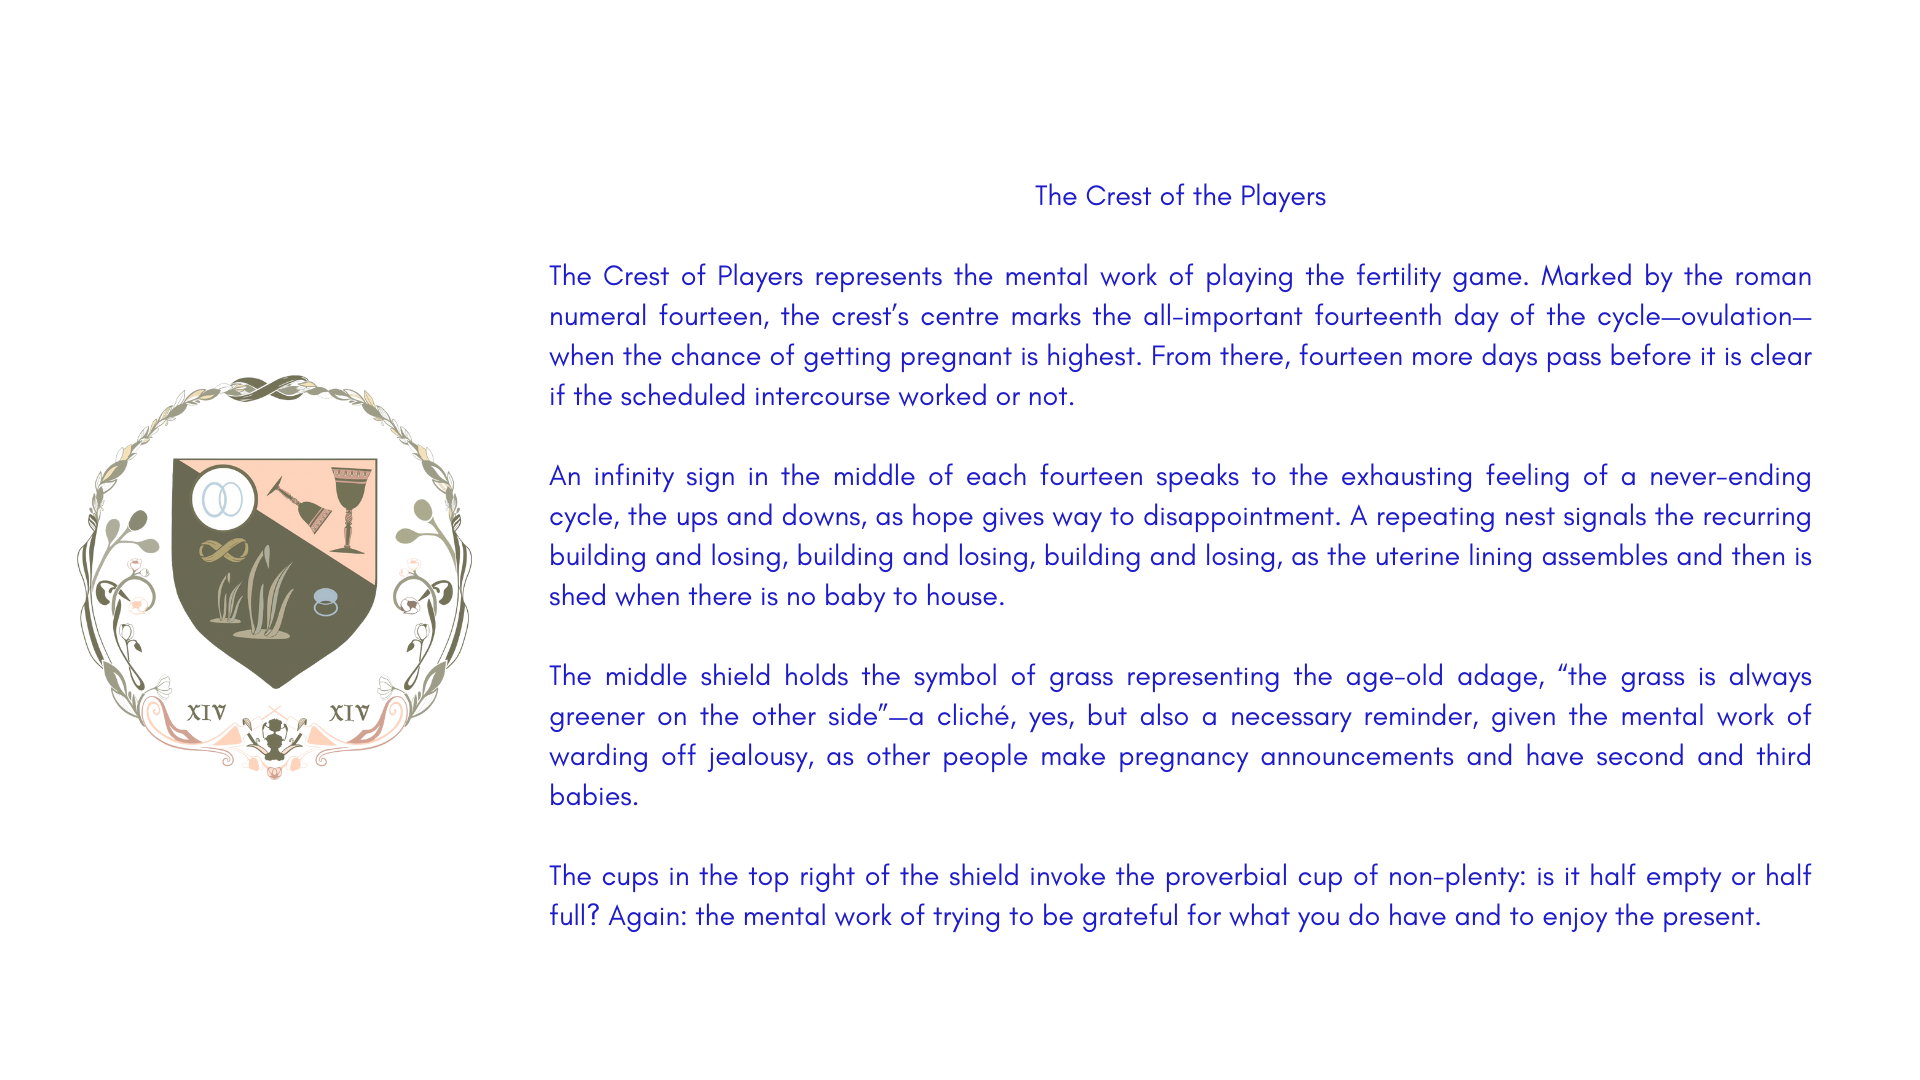   The Crest of the Players,  Written Statement. 